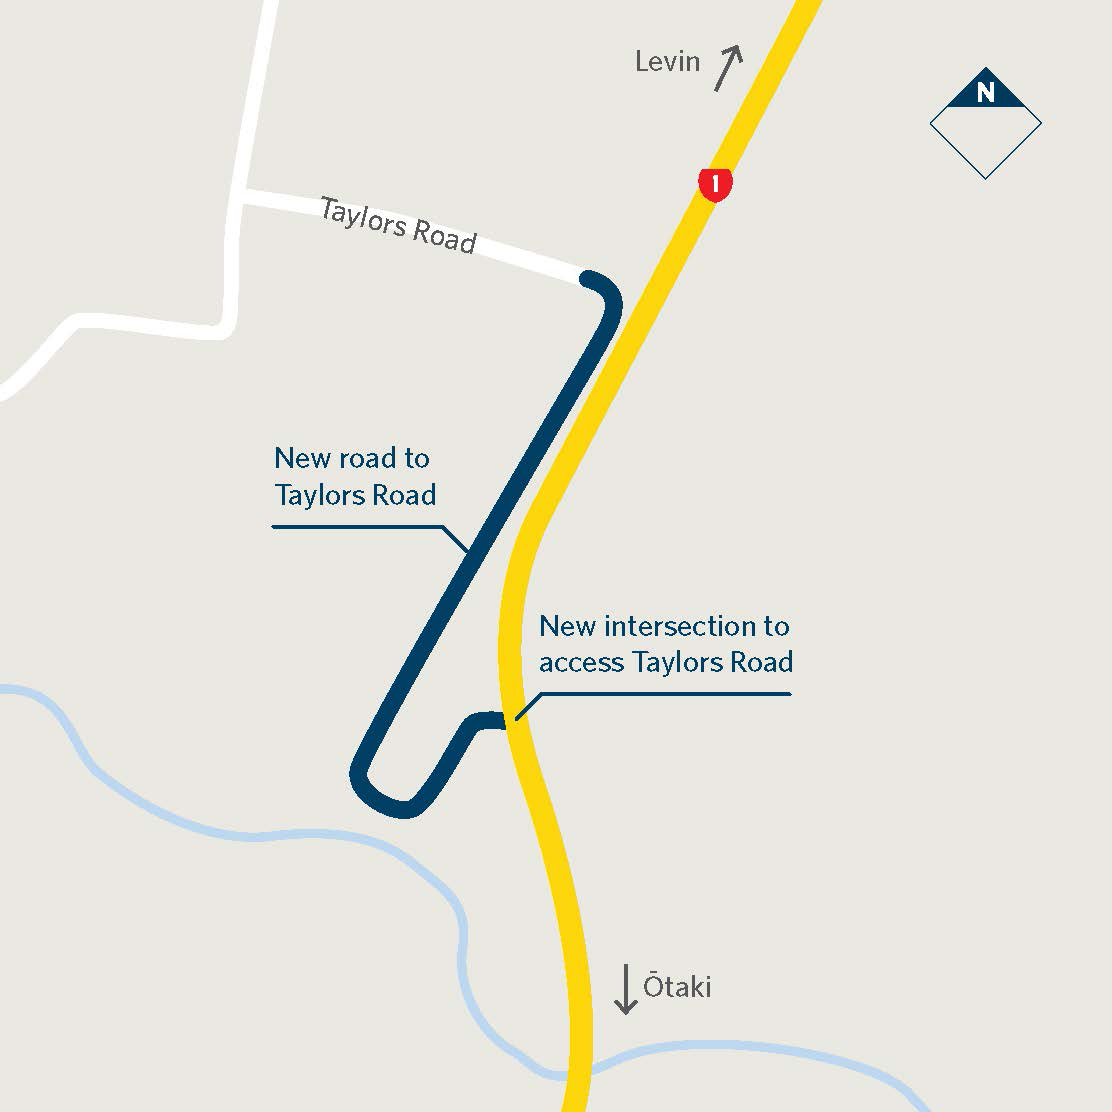 Location of new intersection to access Taylors Road in dark blue.